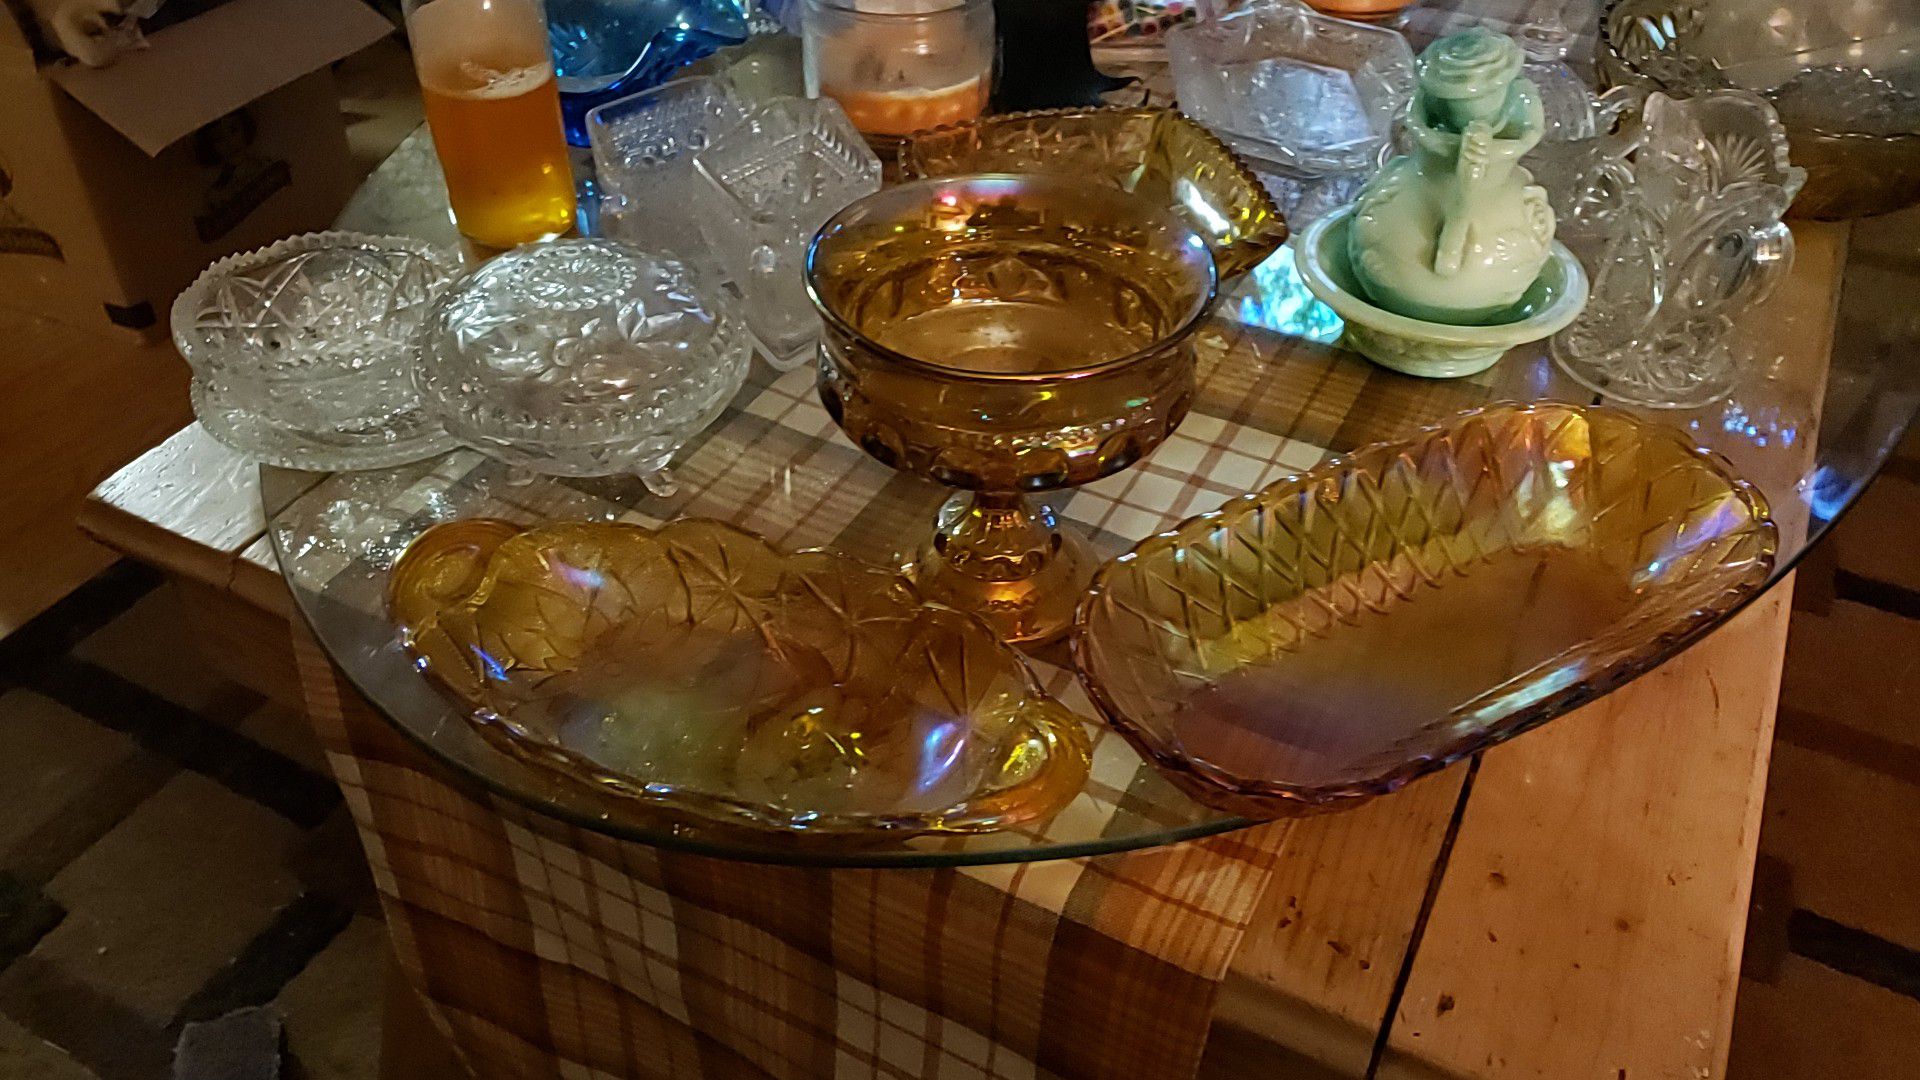 3 carnival glass items